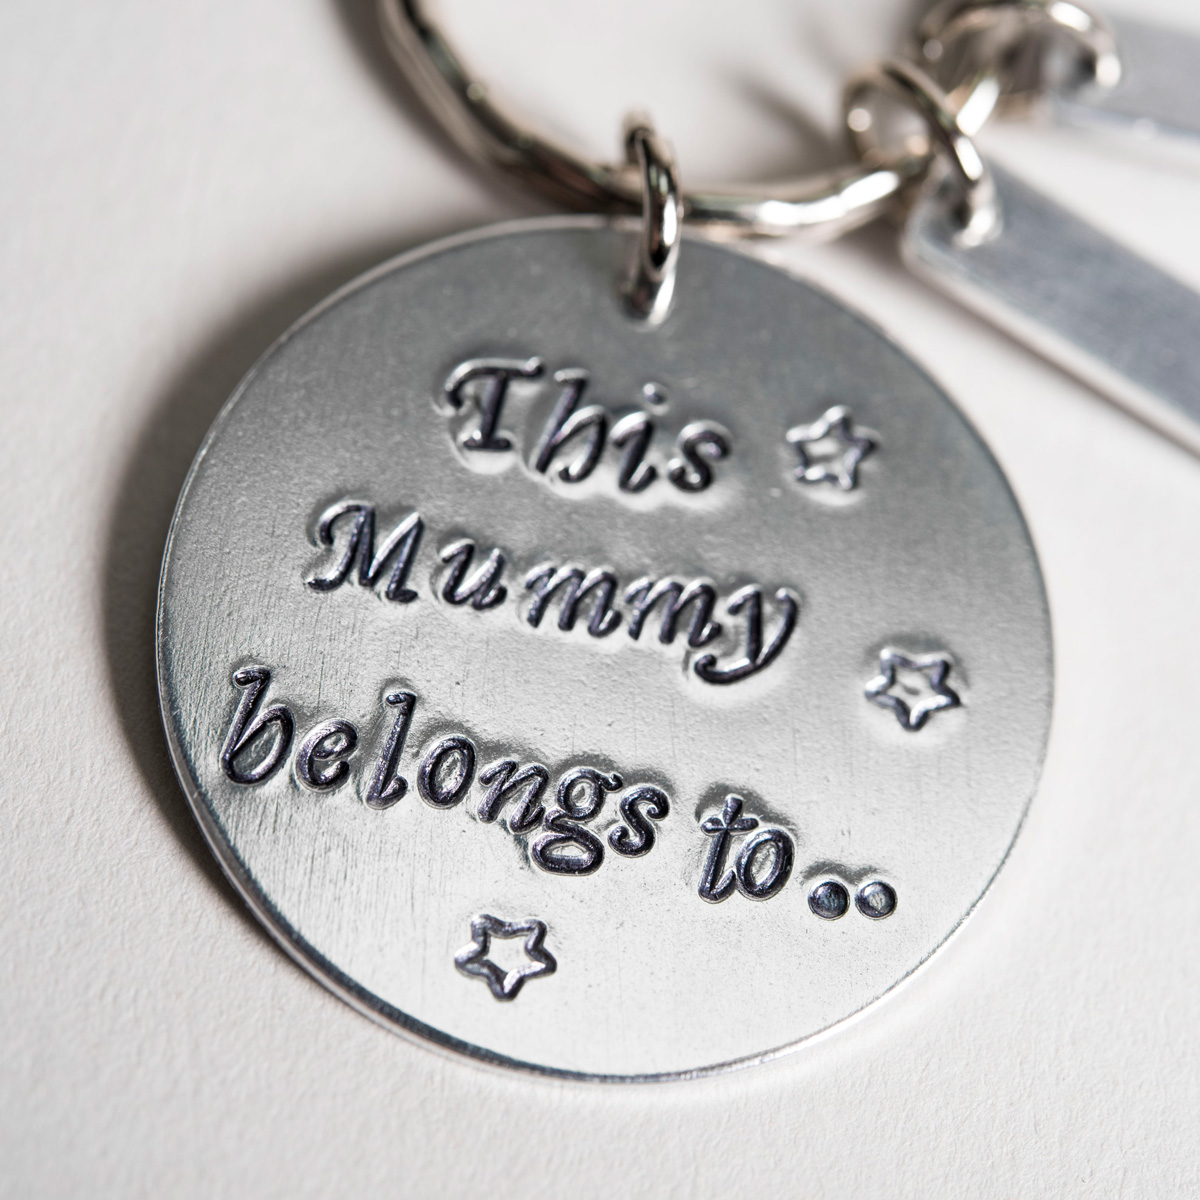 Personalised Key Ring - Name Charms